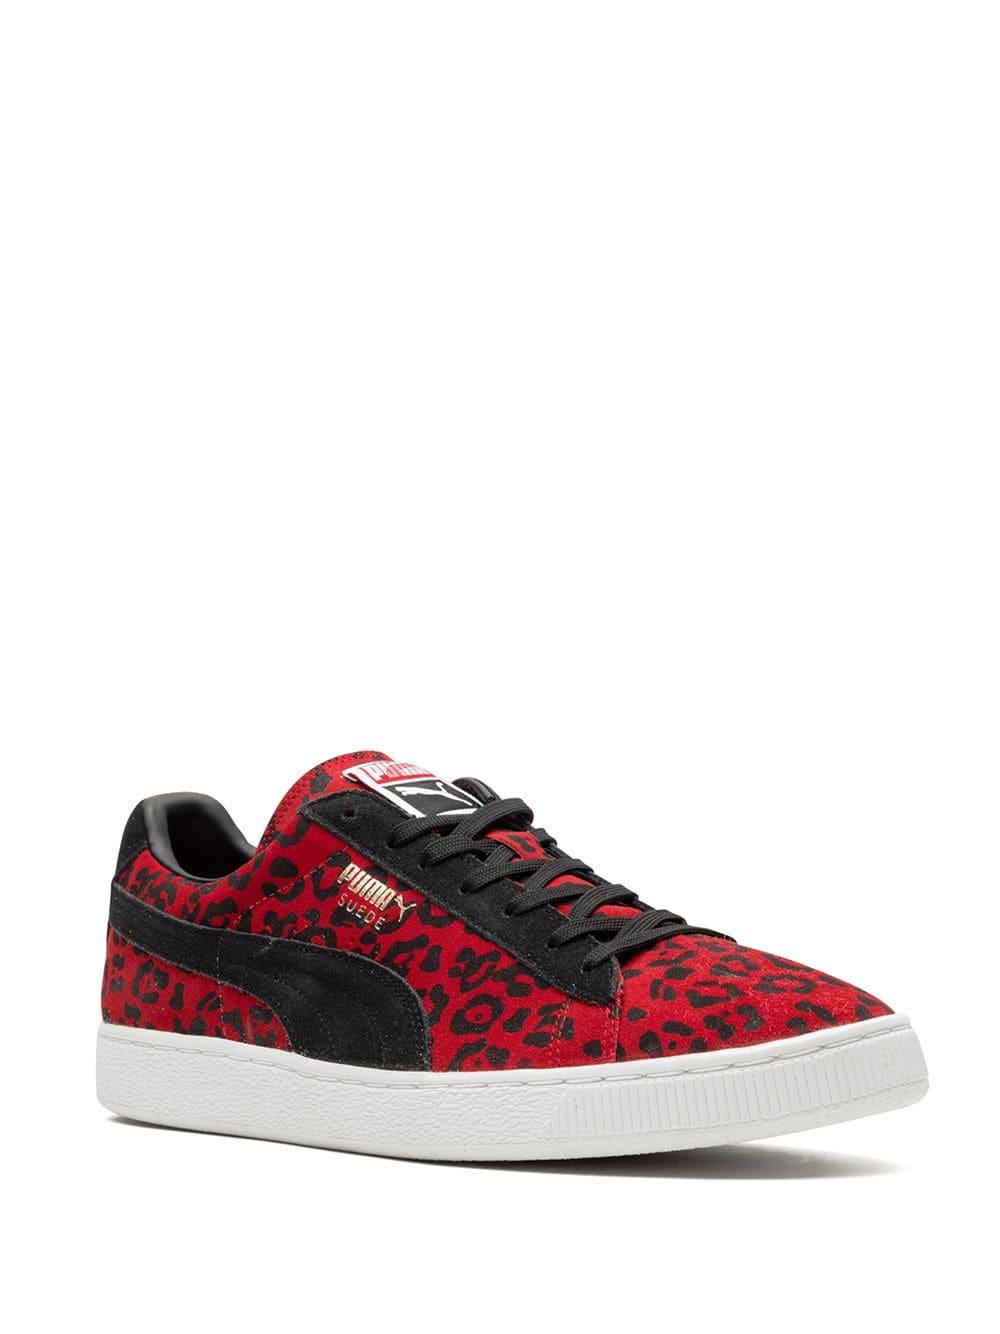 PUMA Leopard Print Sneakers in Red for Men | Lyst